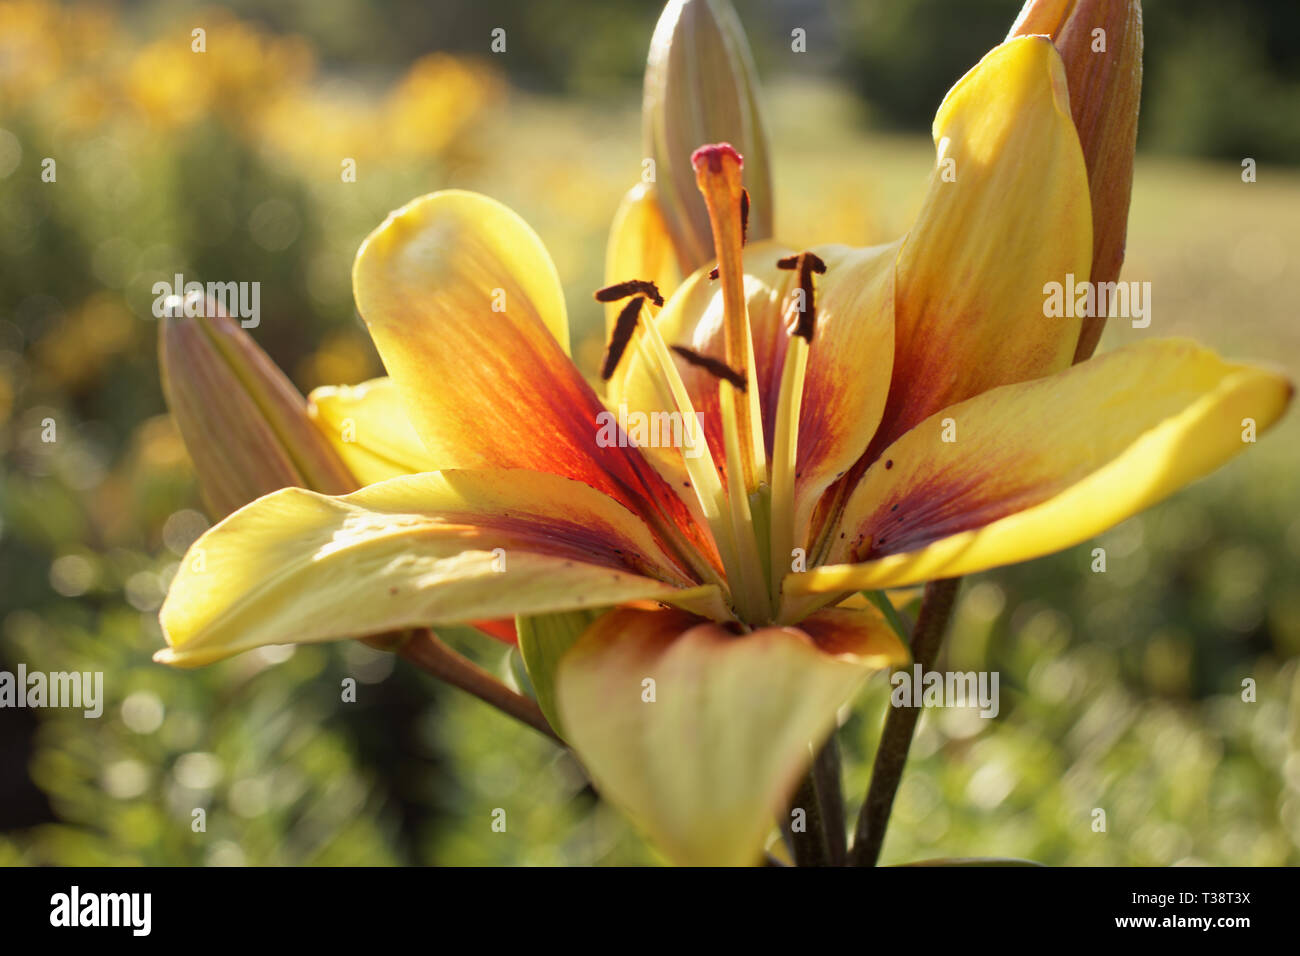 Yellow lily flowers in a garden in a summer day Stock Photo